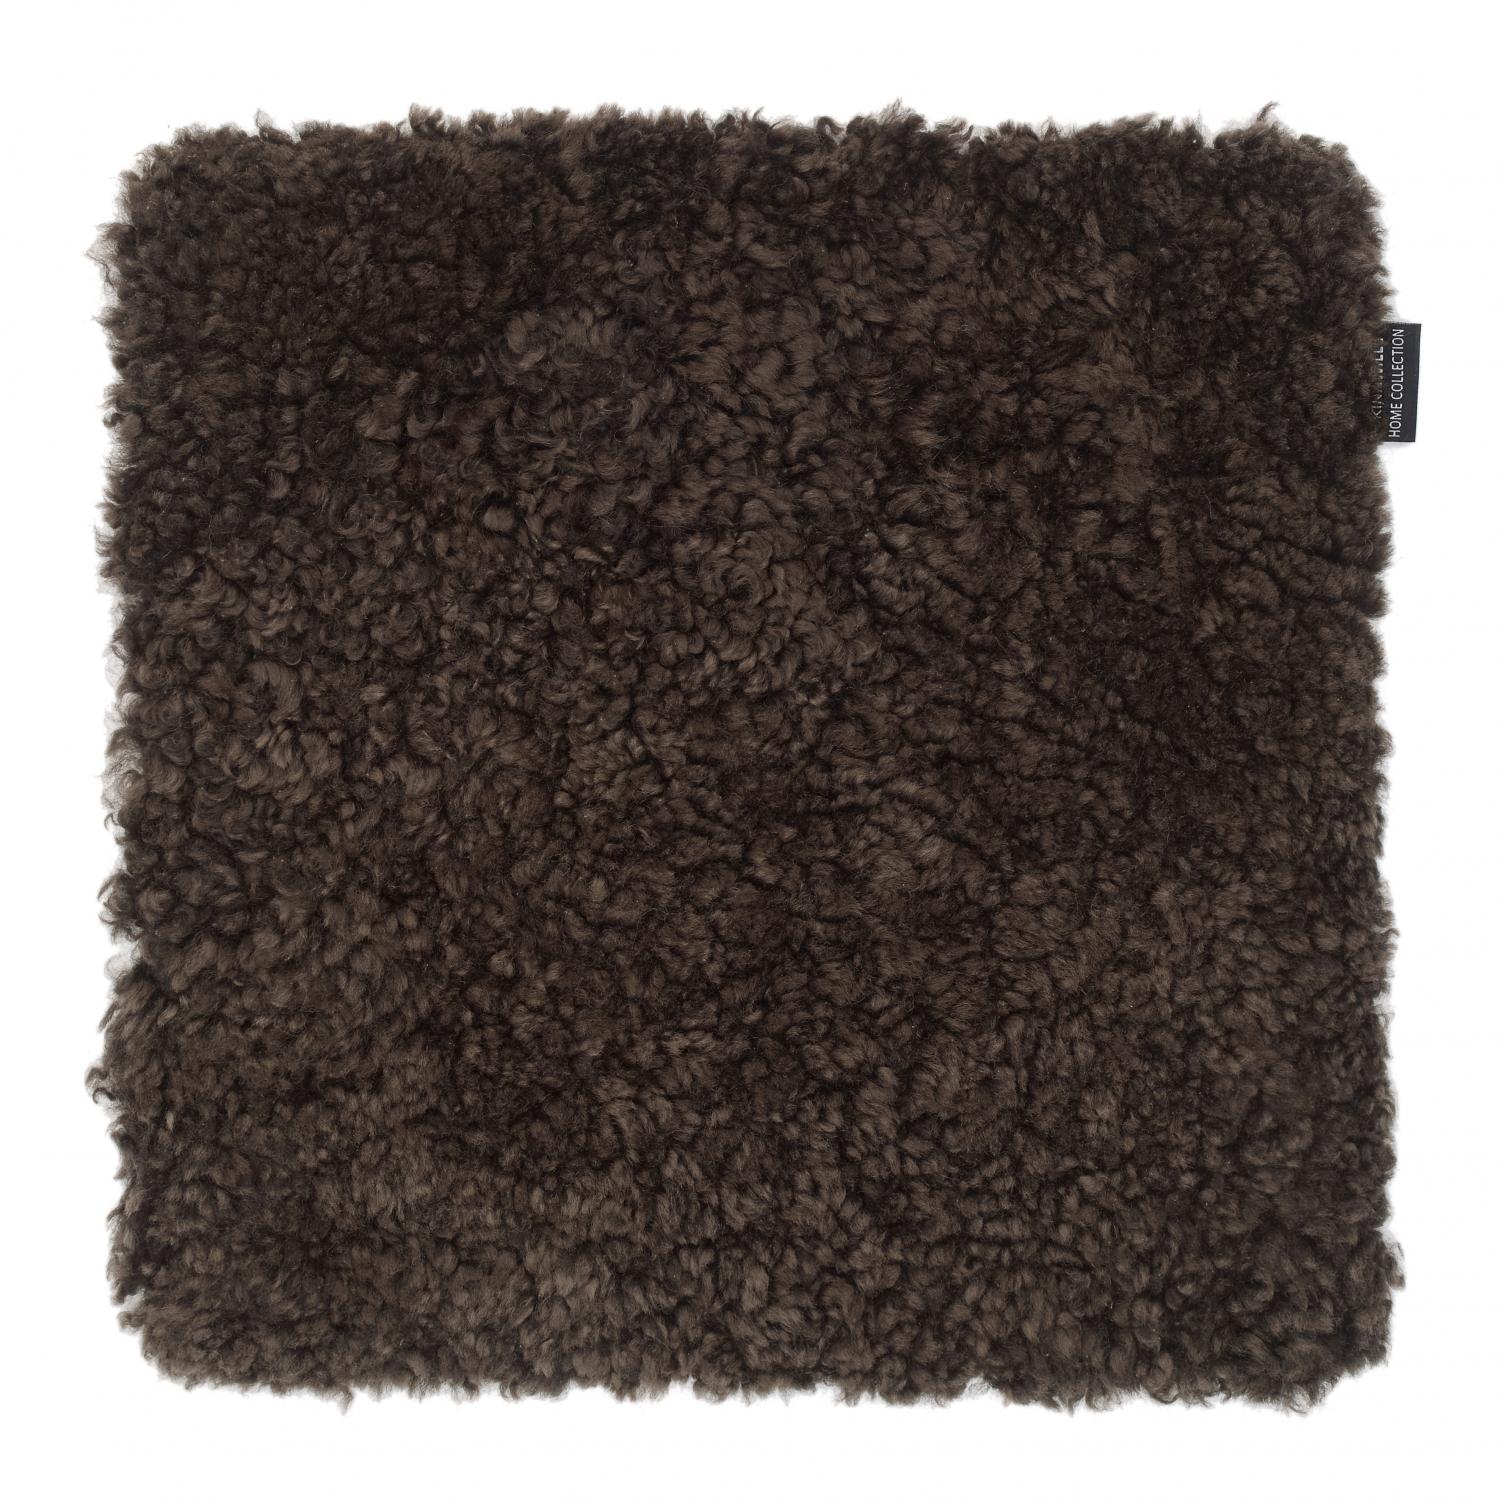 Curly Seat pad 40x40 - Brown